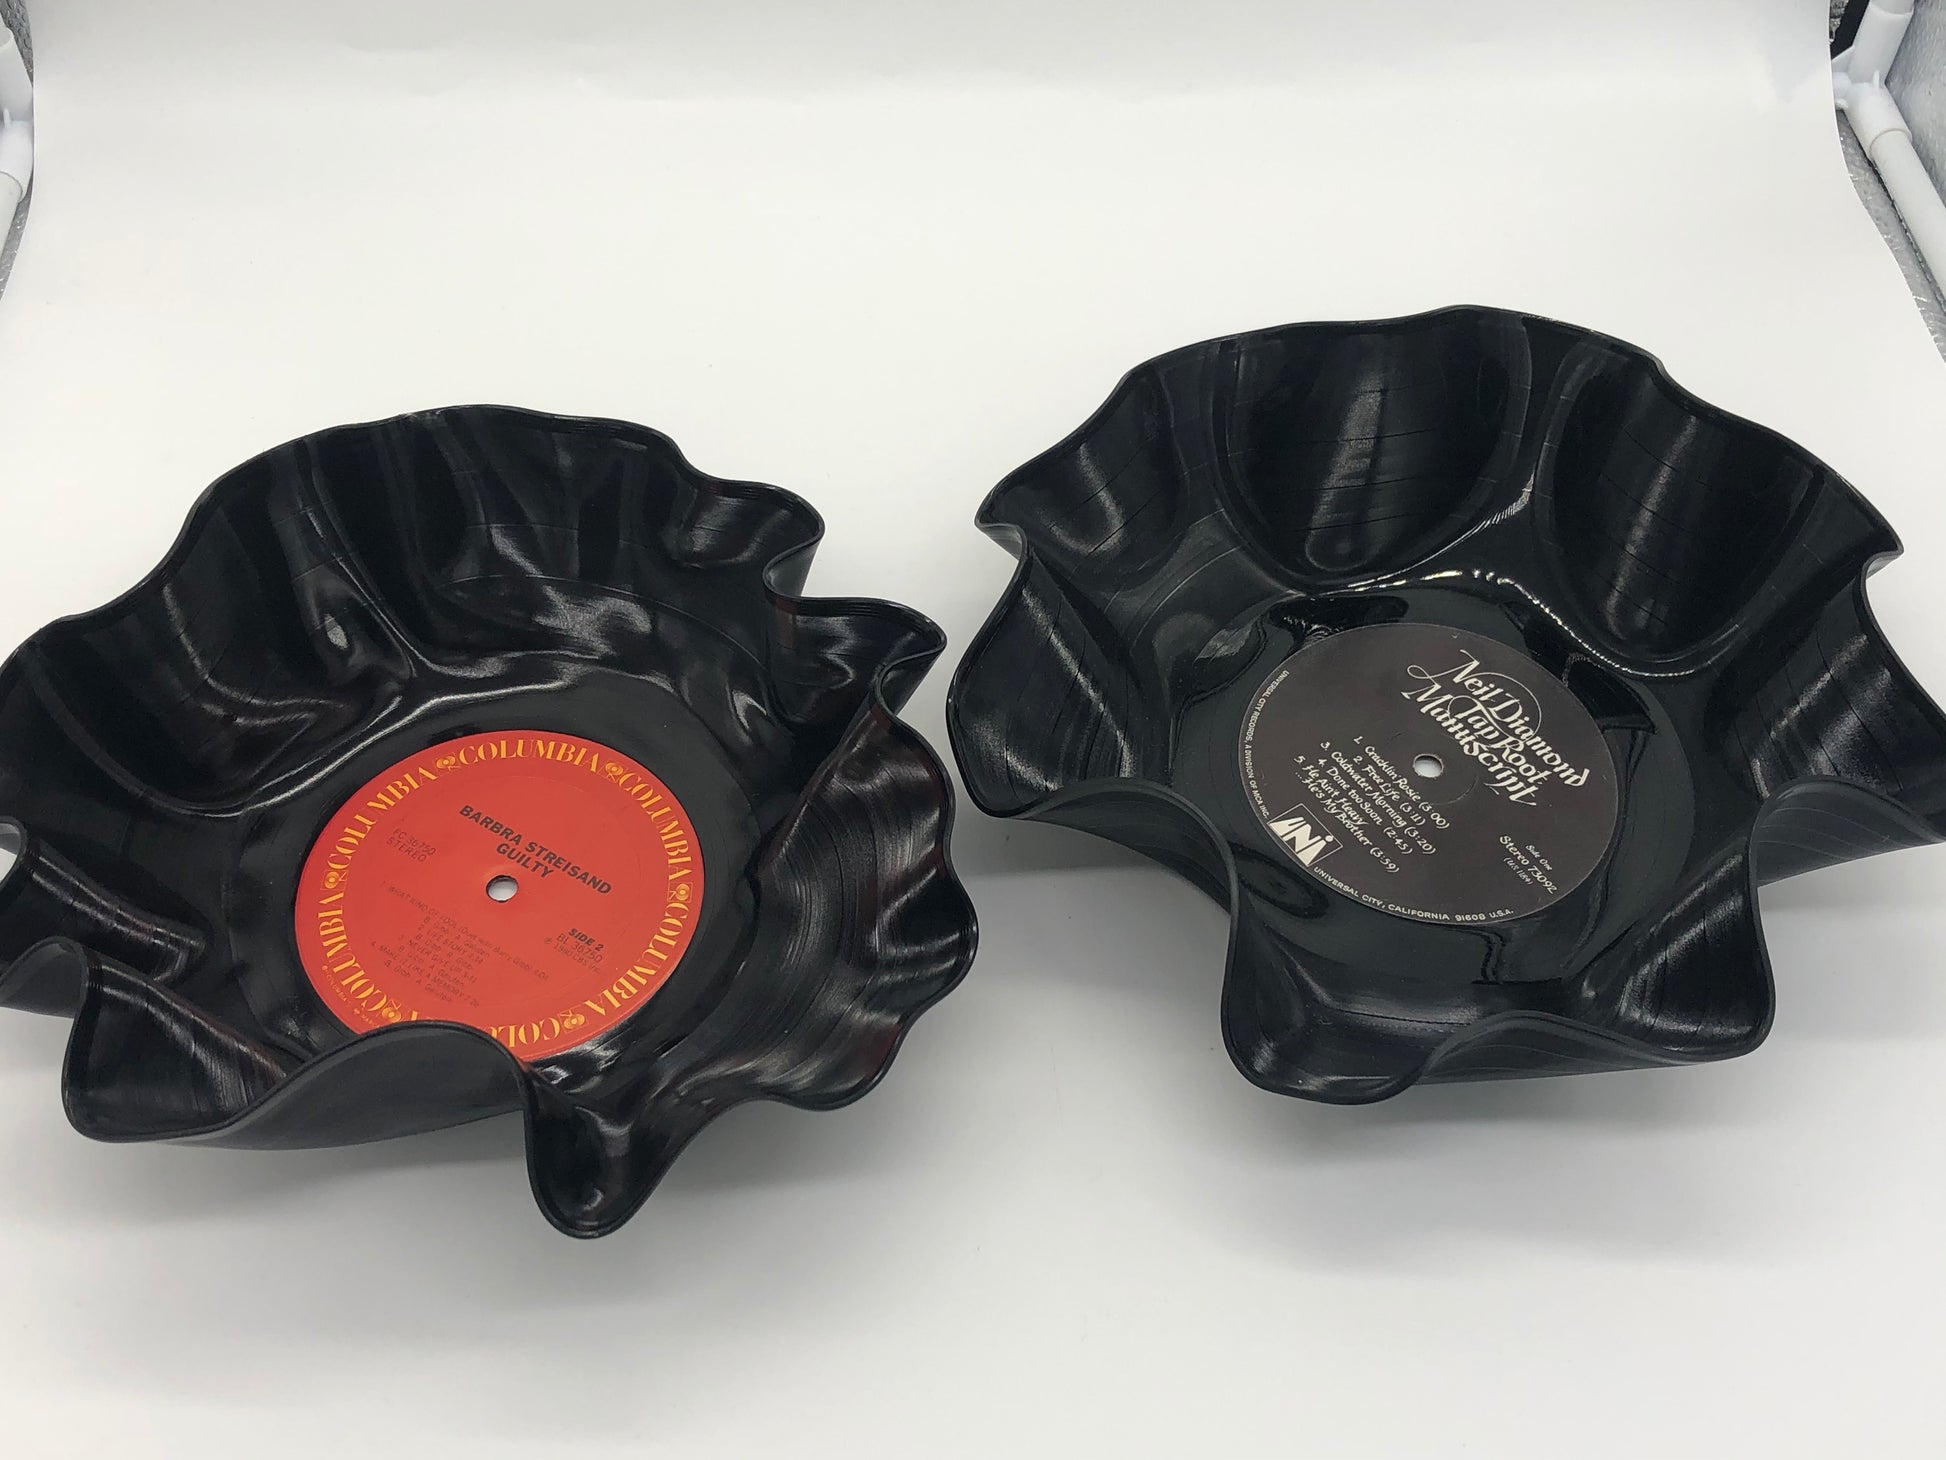 Two black bowls with ruffled edges made from melted records